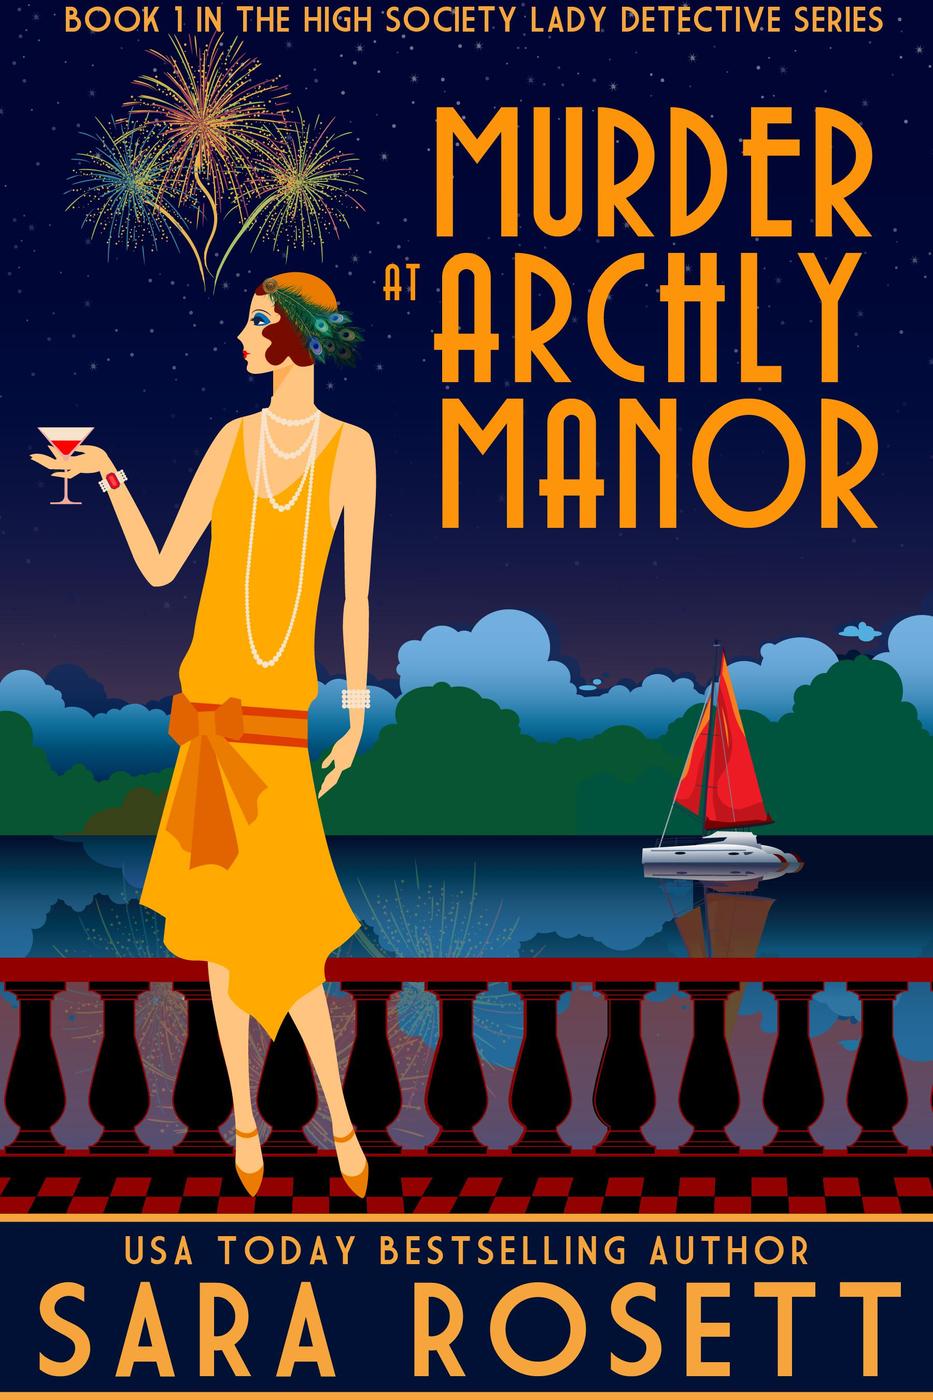 Image de couverture de Murder at Archly Manor (High Society Lady Detective, #1) [electronic resource] :